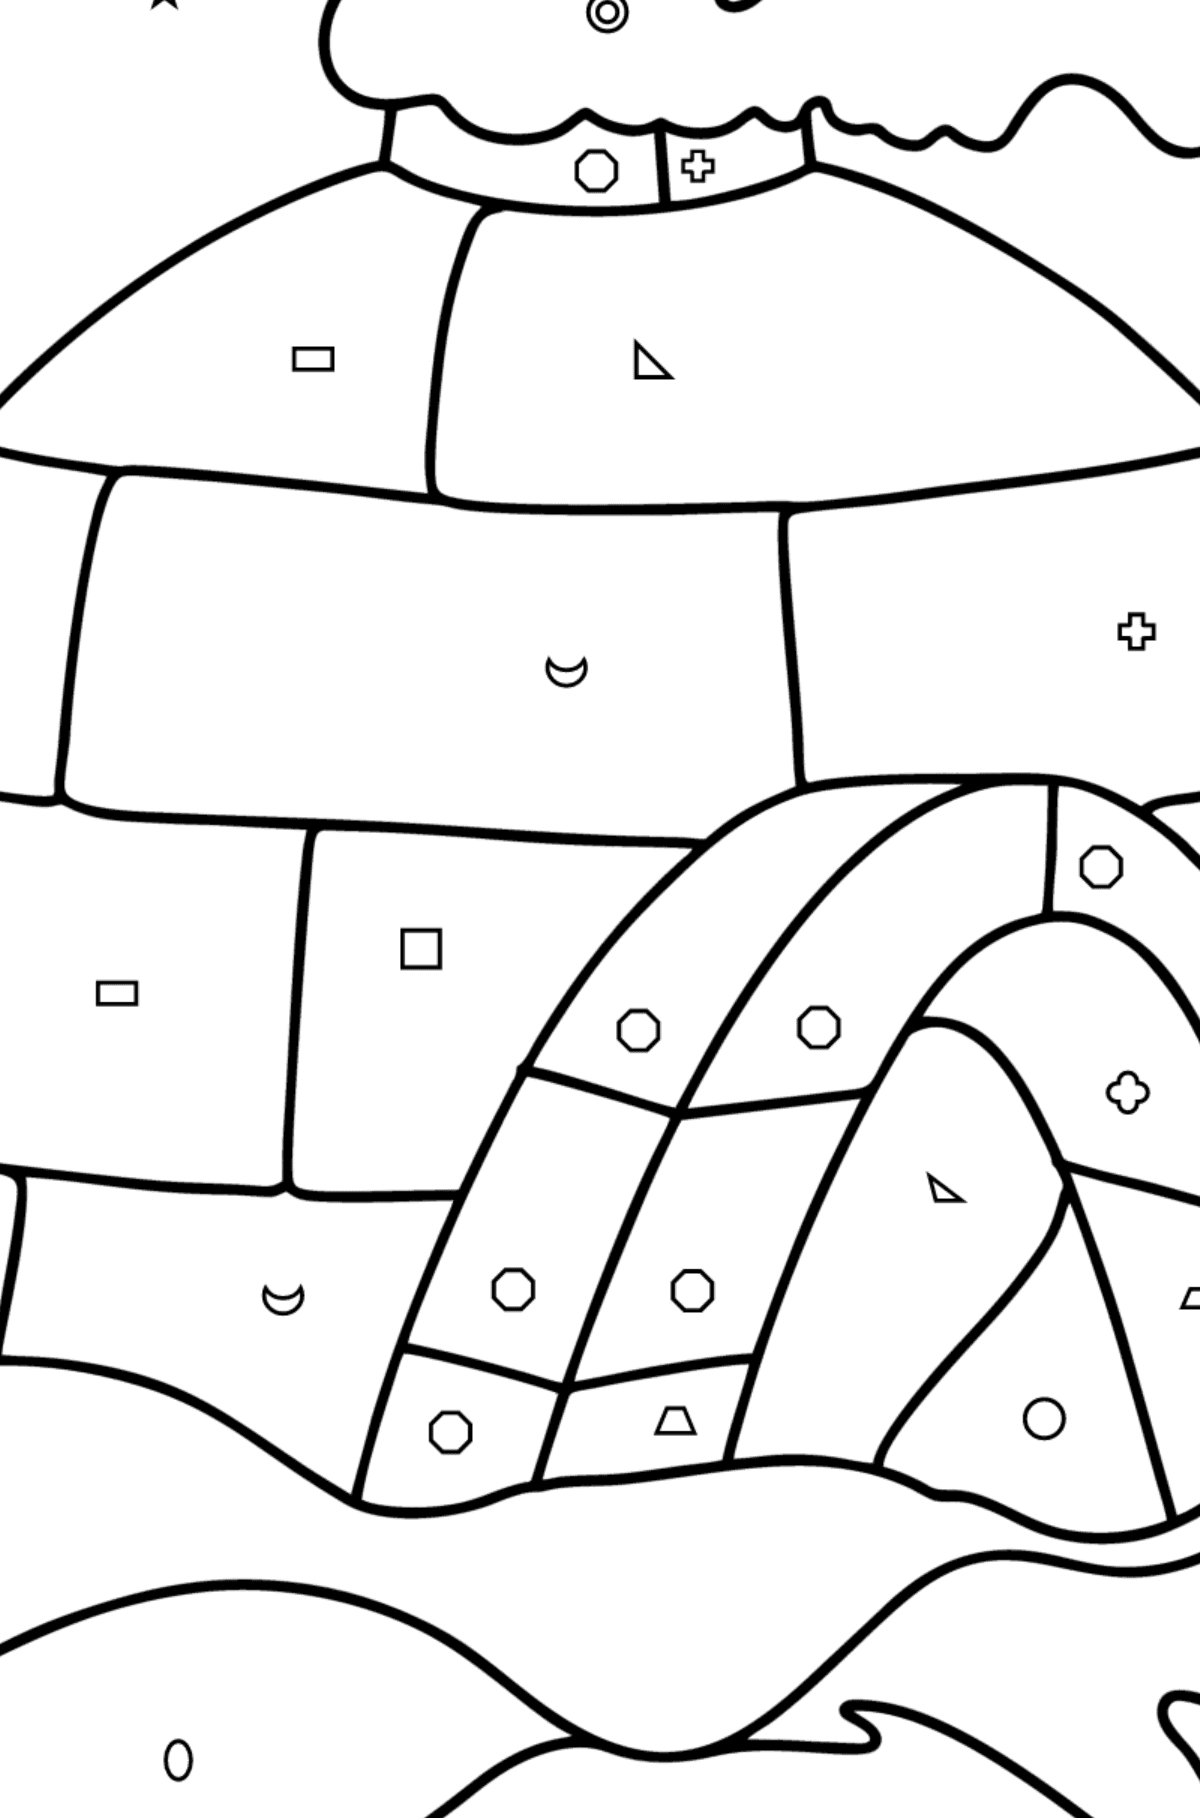 Igloo ice House coloring page - Coloring by Geometric Shapes for Kids